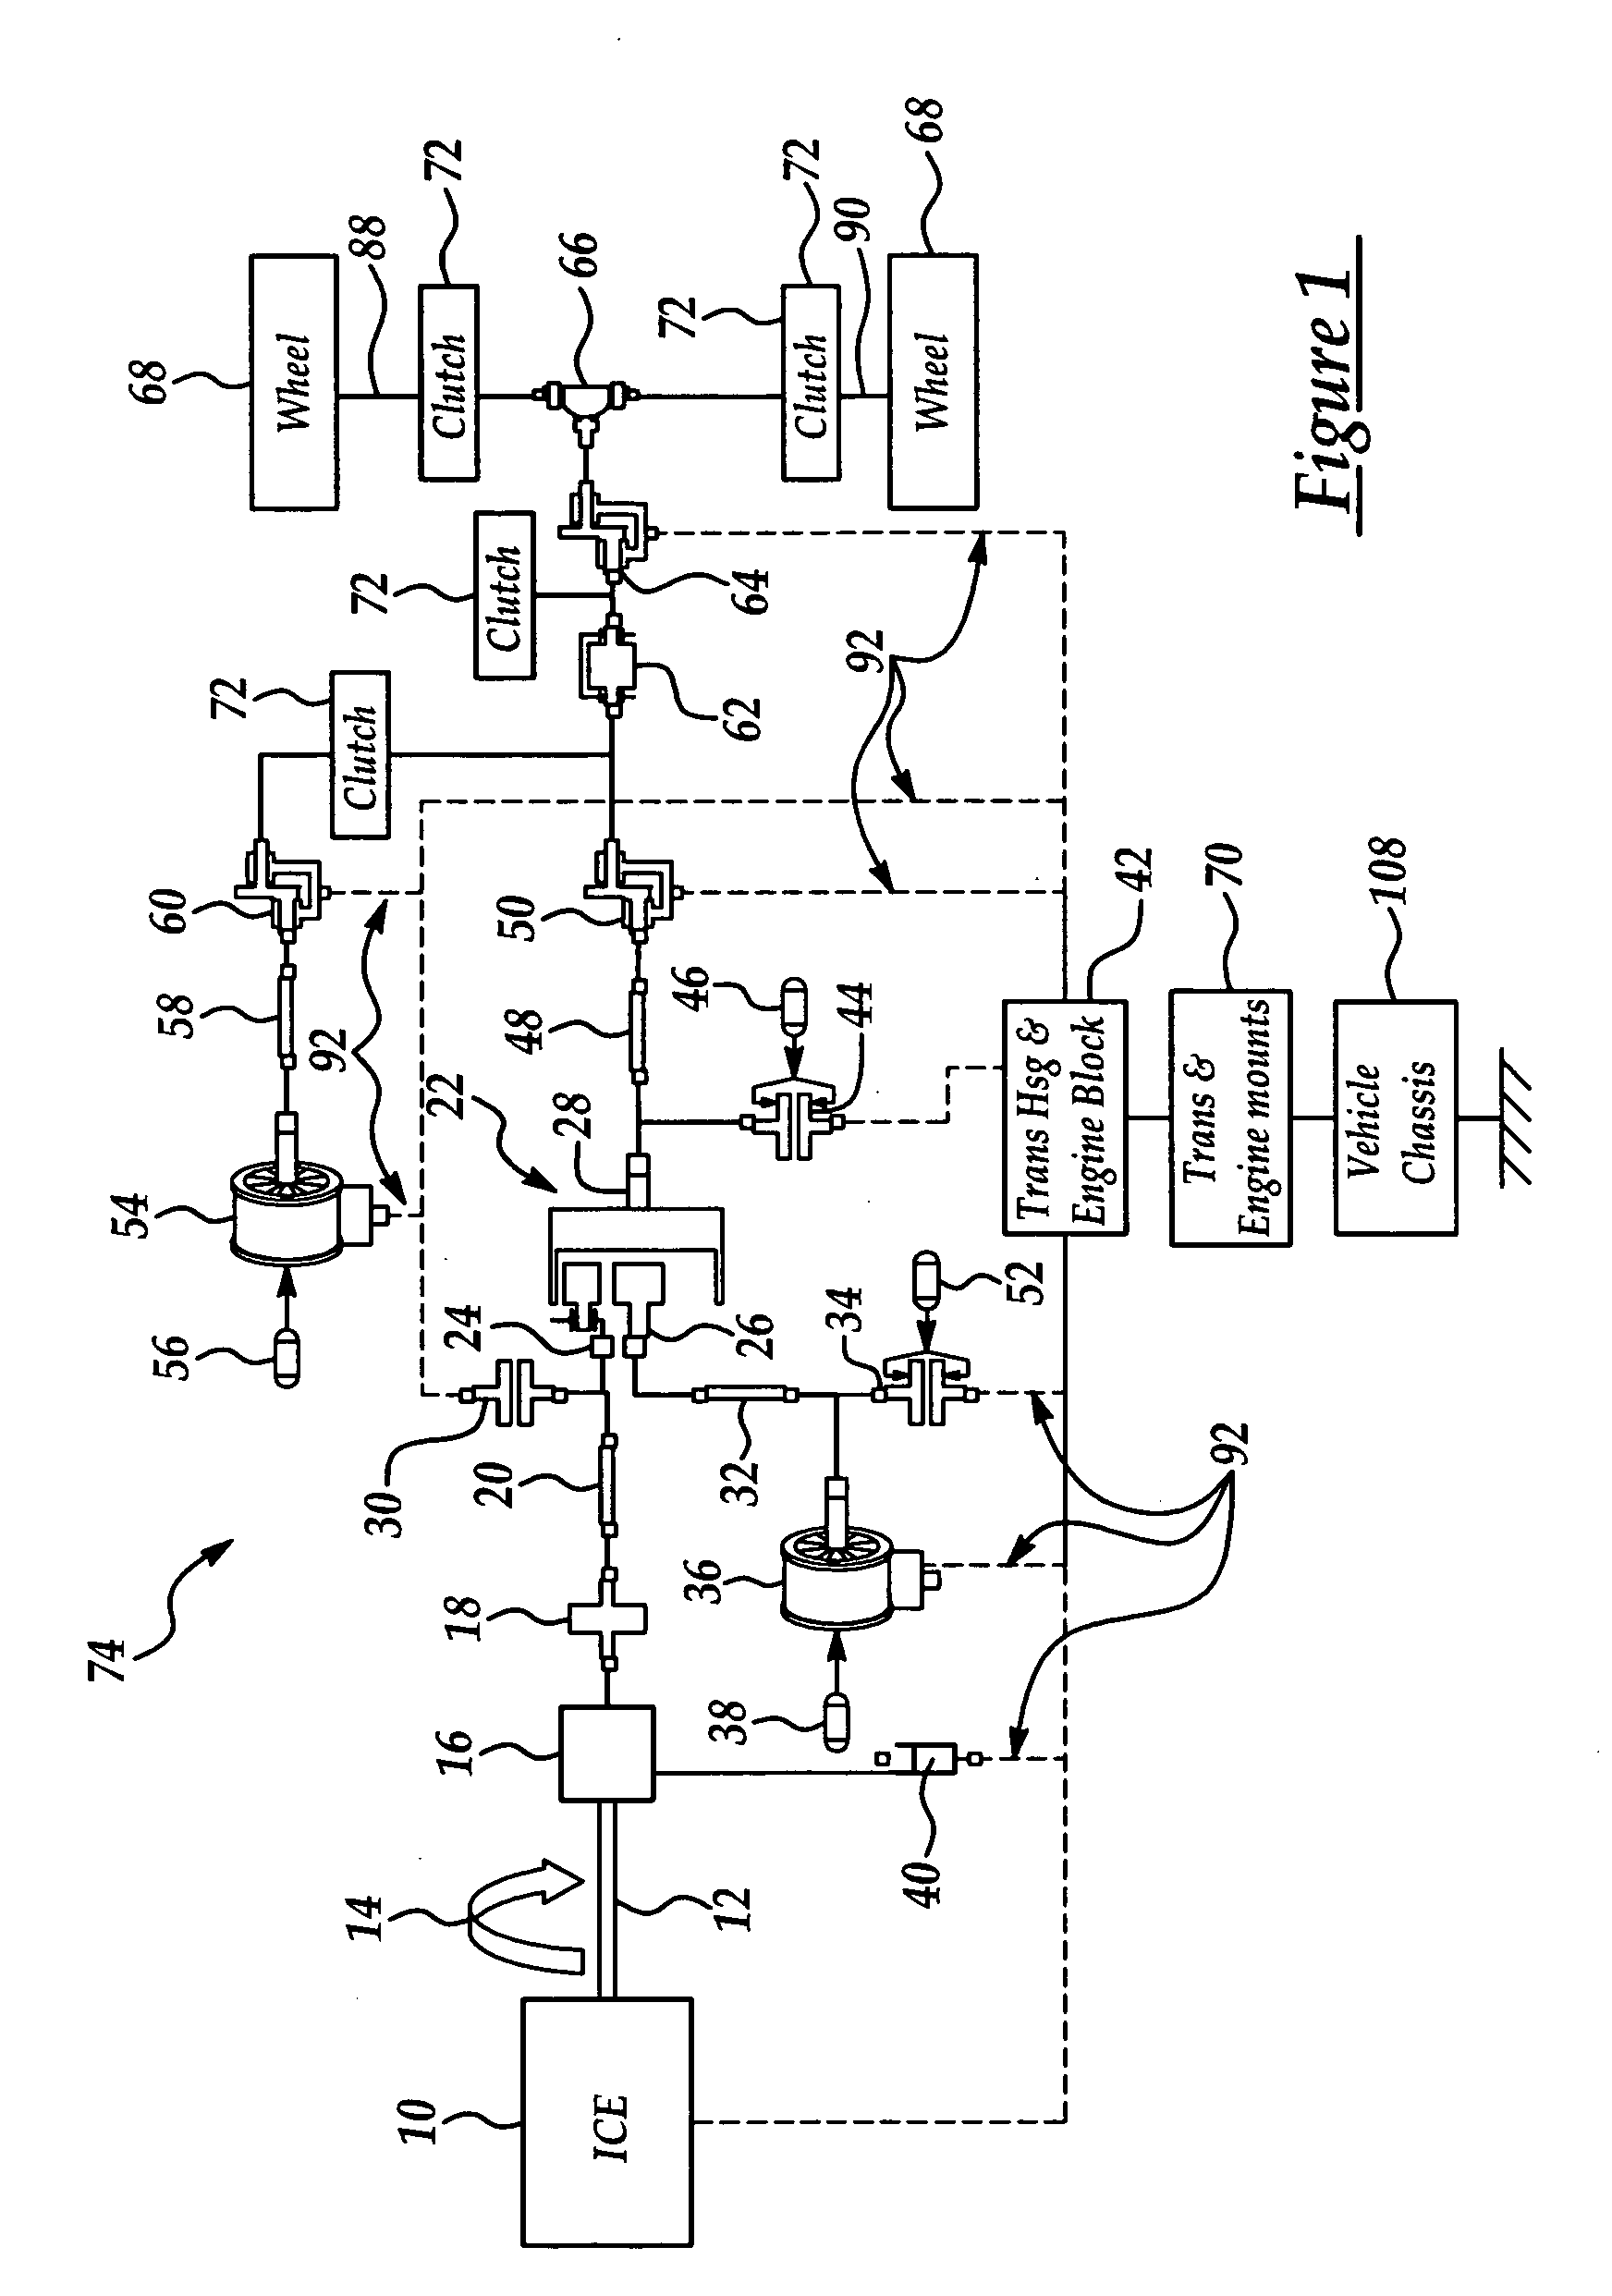 System for limiting reactive torque in powertrains